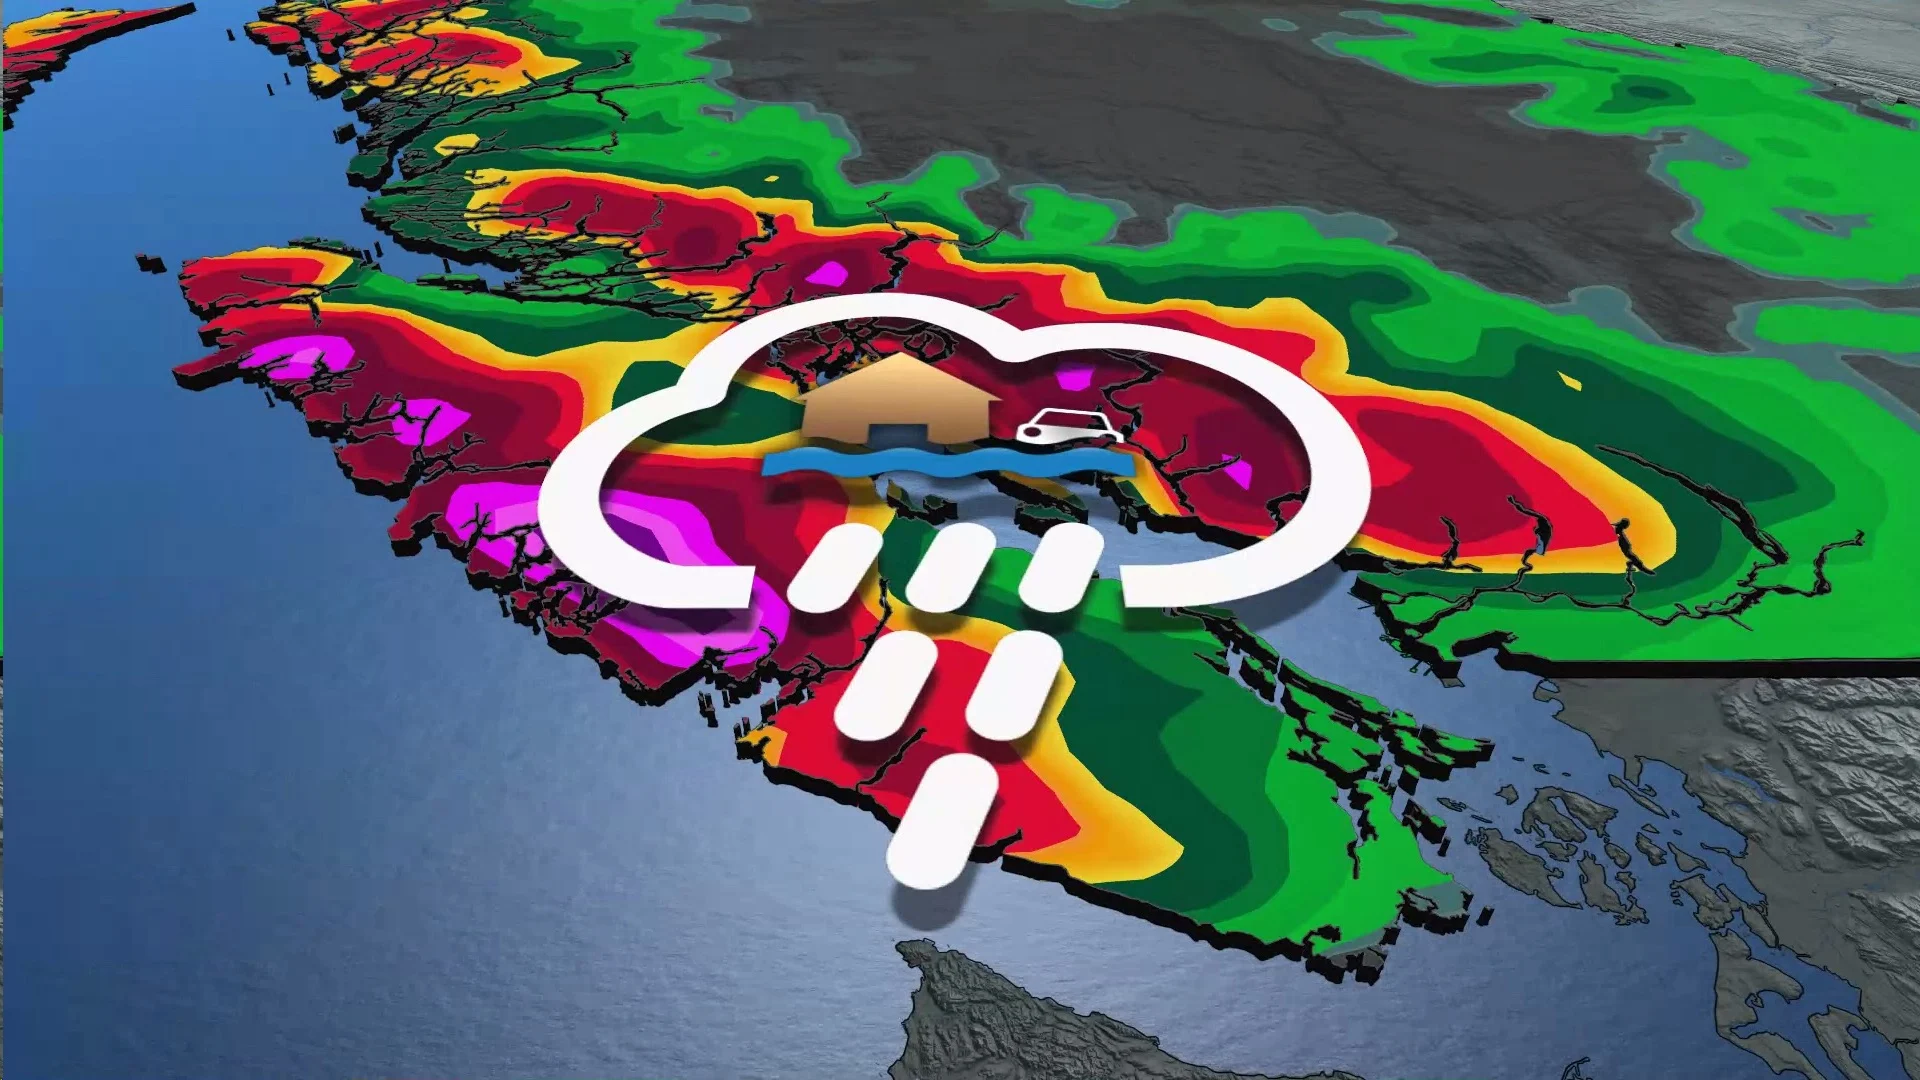 Parade of atmospheric rivers in B.C. keep avalanche, flood worries high